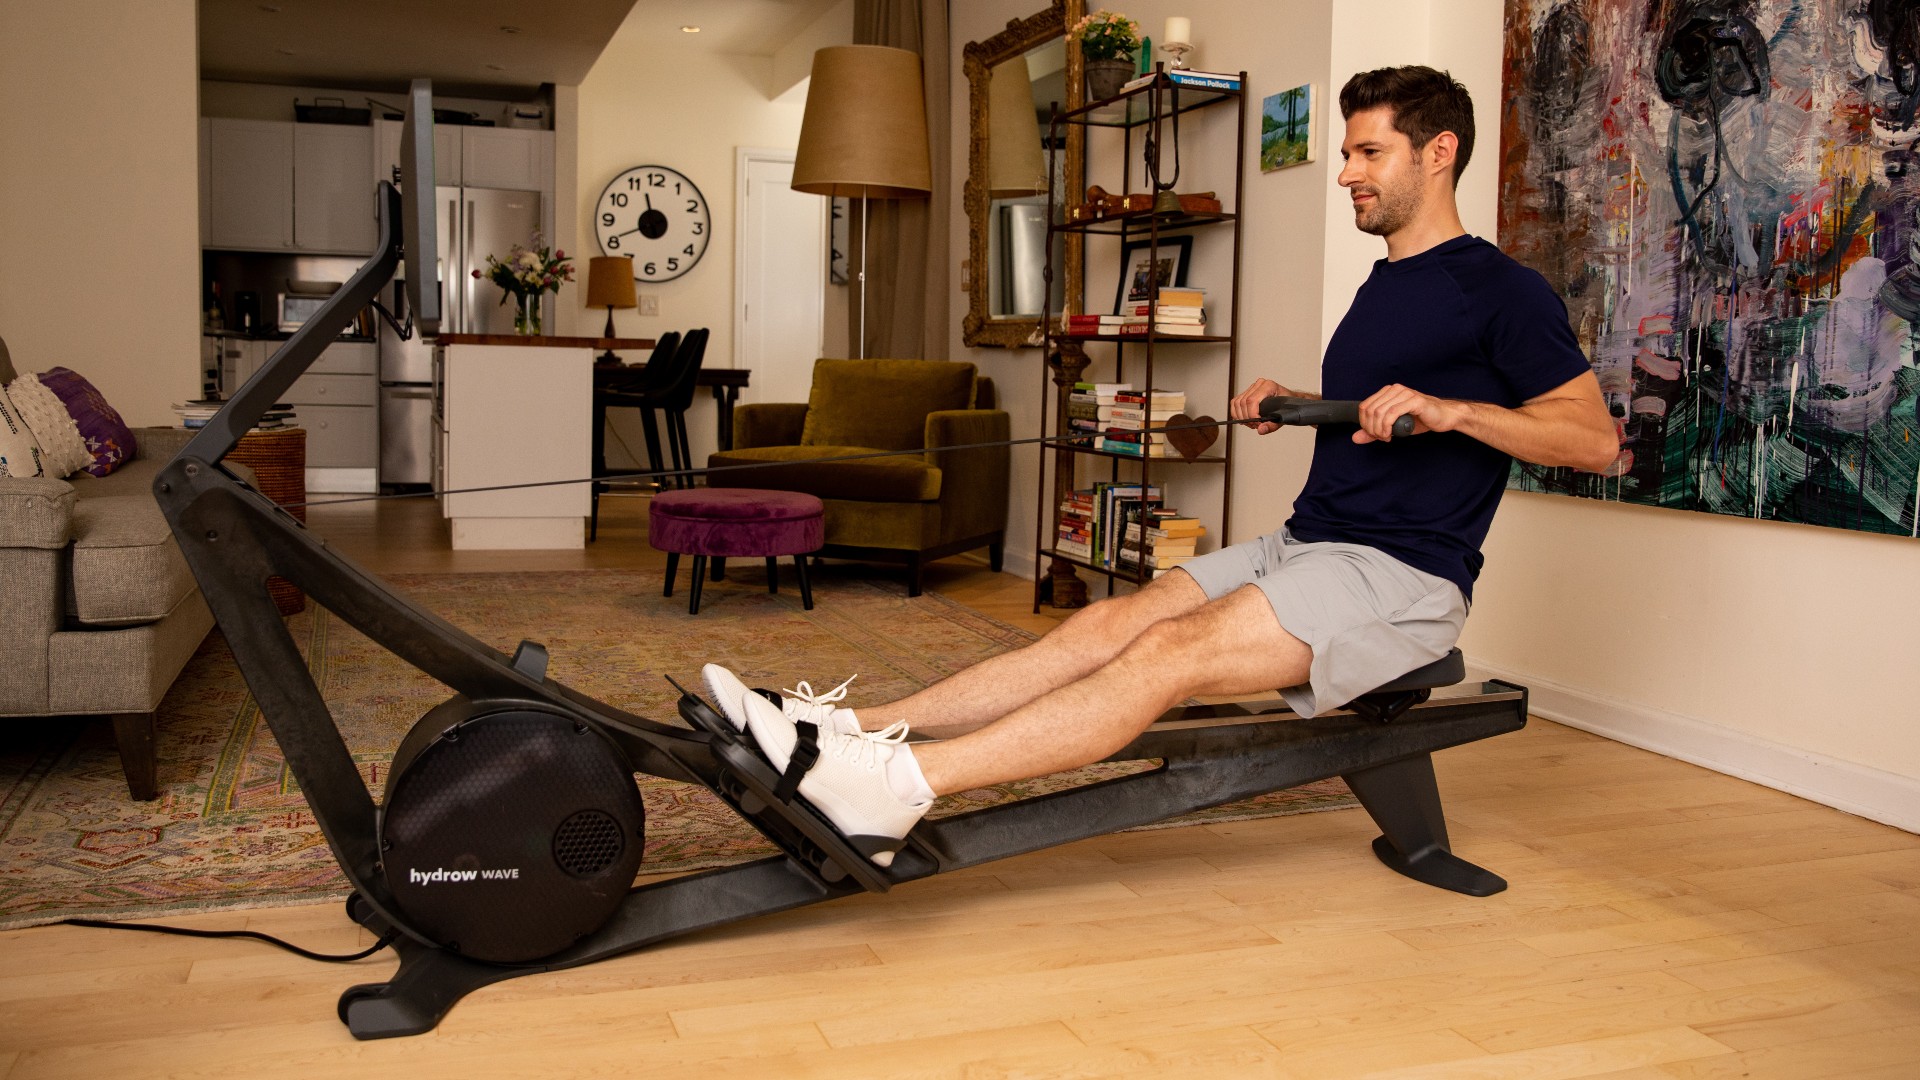 Hydrow Wave Review The Connected Rowing Machine To Beat Coach